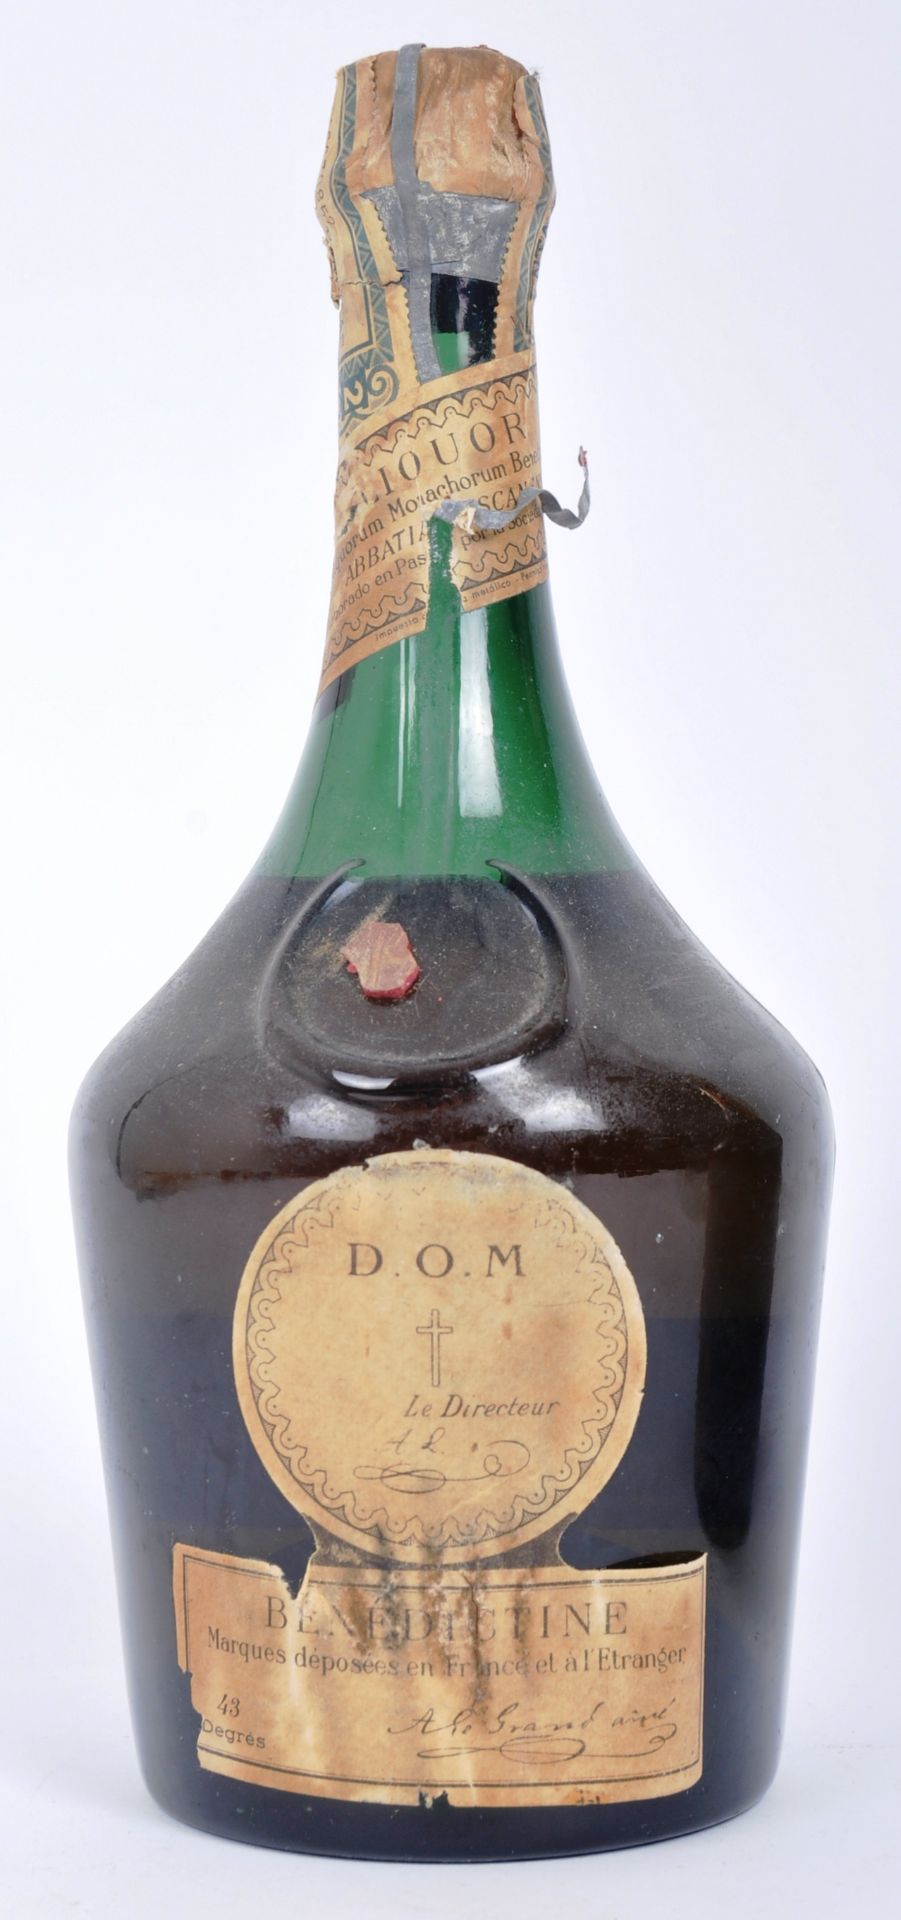 D.O.M. BENEDICTINE - TWO BOTTLES OF VINTAGE CHAMPAGNE - Image 2 of 11